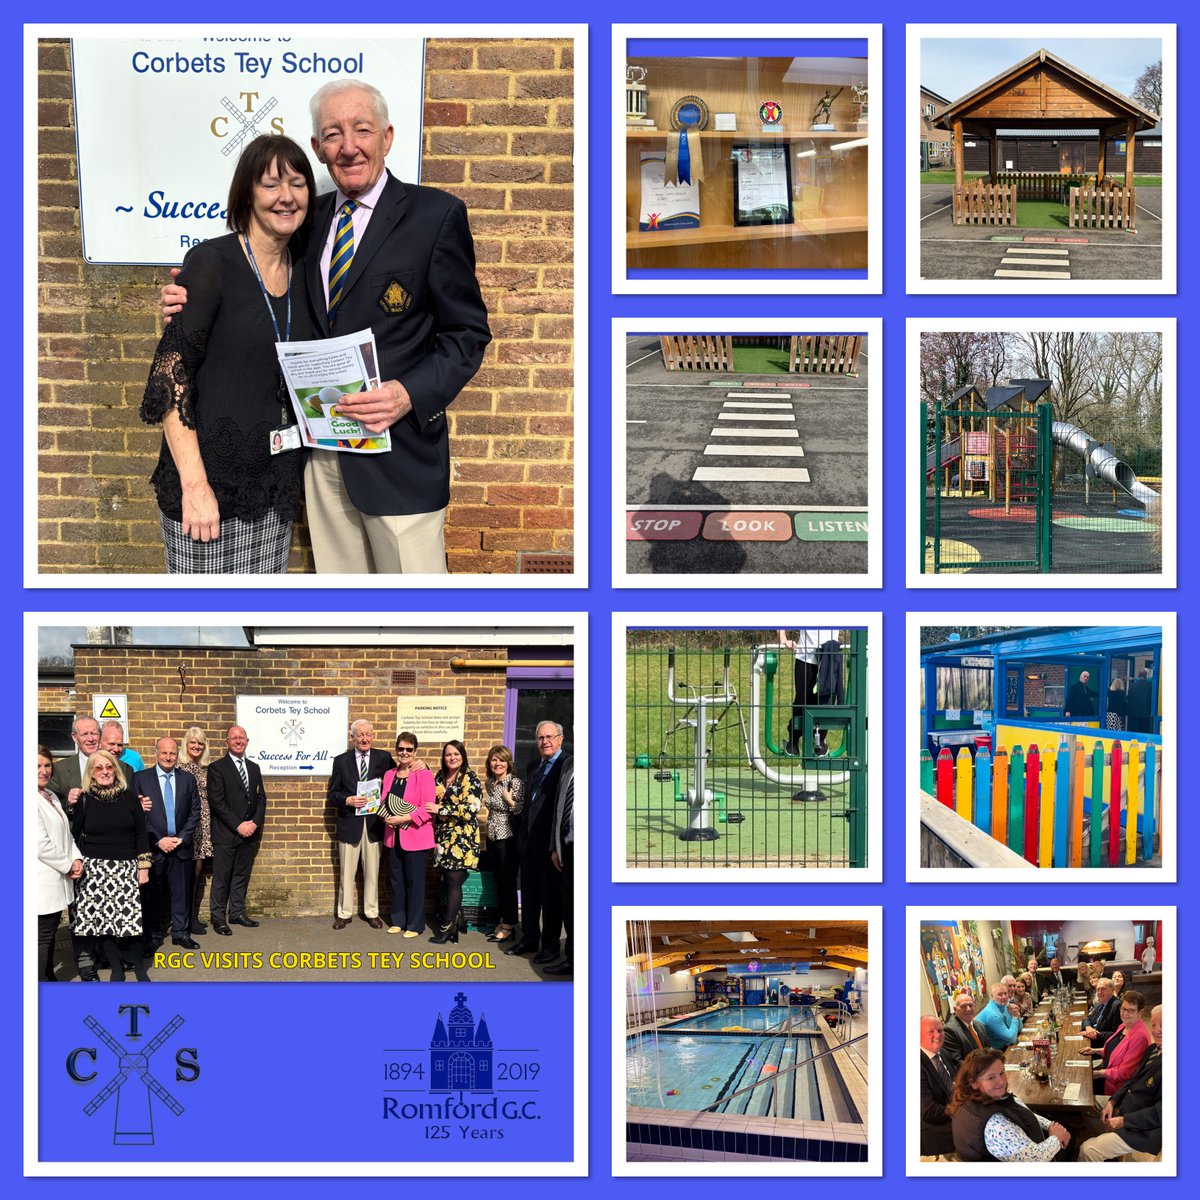 Last week some of our members & staff visited #corbetsteyschool We were greeted with a fantastic assemble with lots of singing & were shown around to see all the projects that our charity donations helped fund. Huge thank you to all the children, staff & RGC members #charity